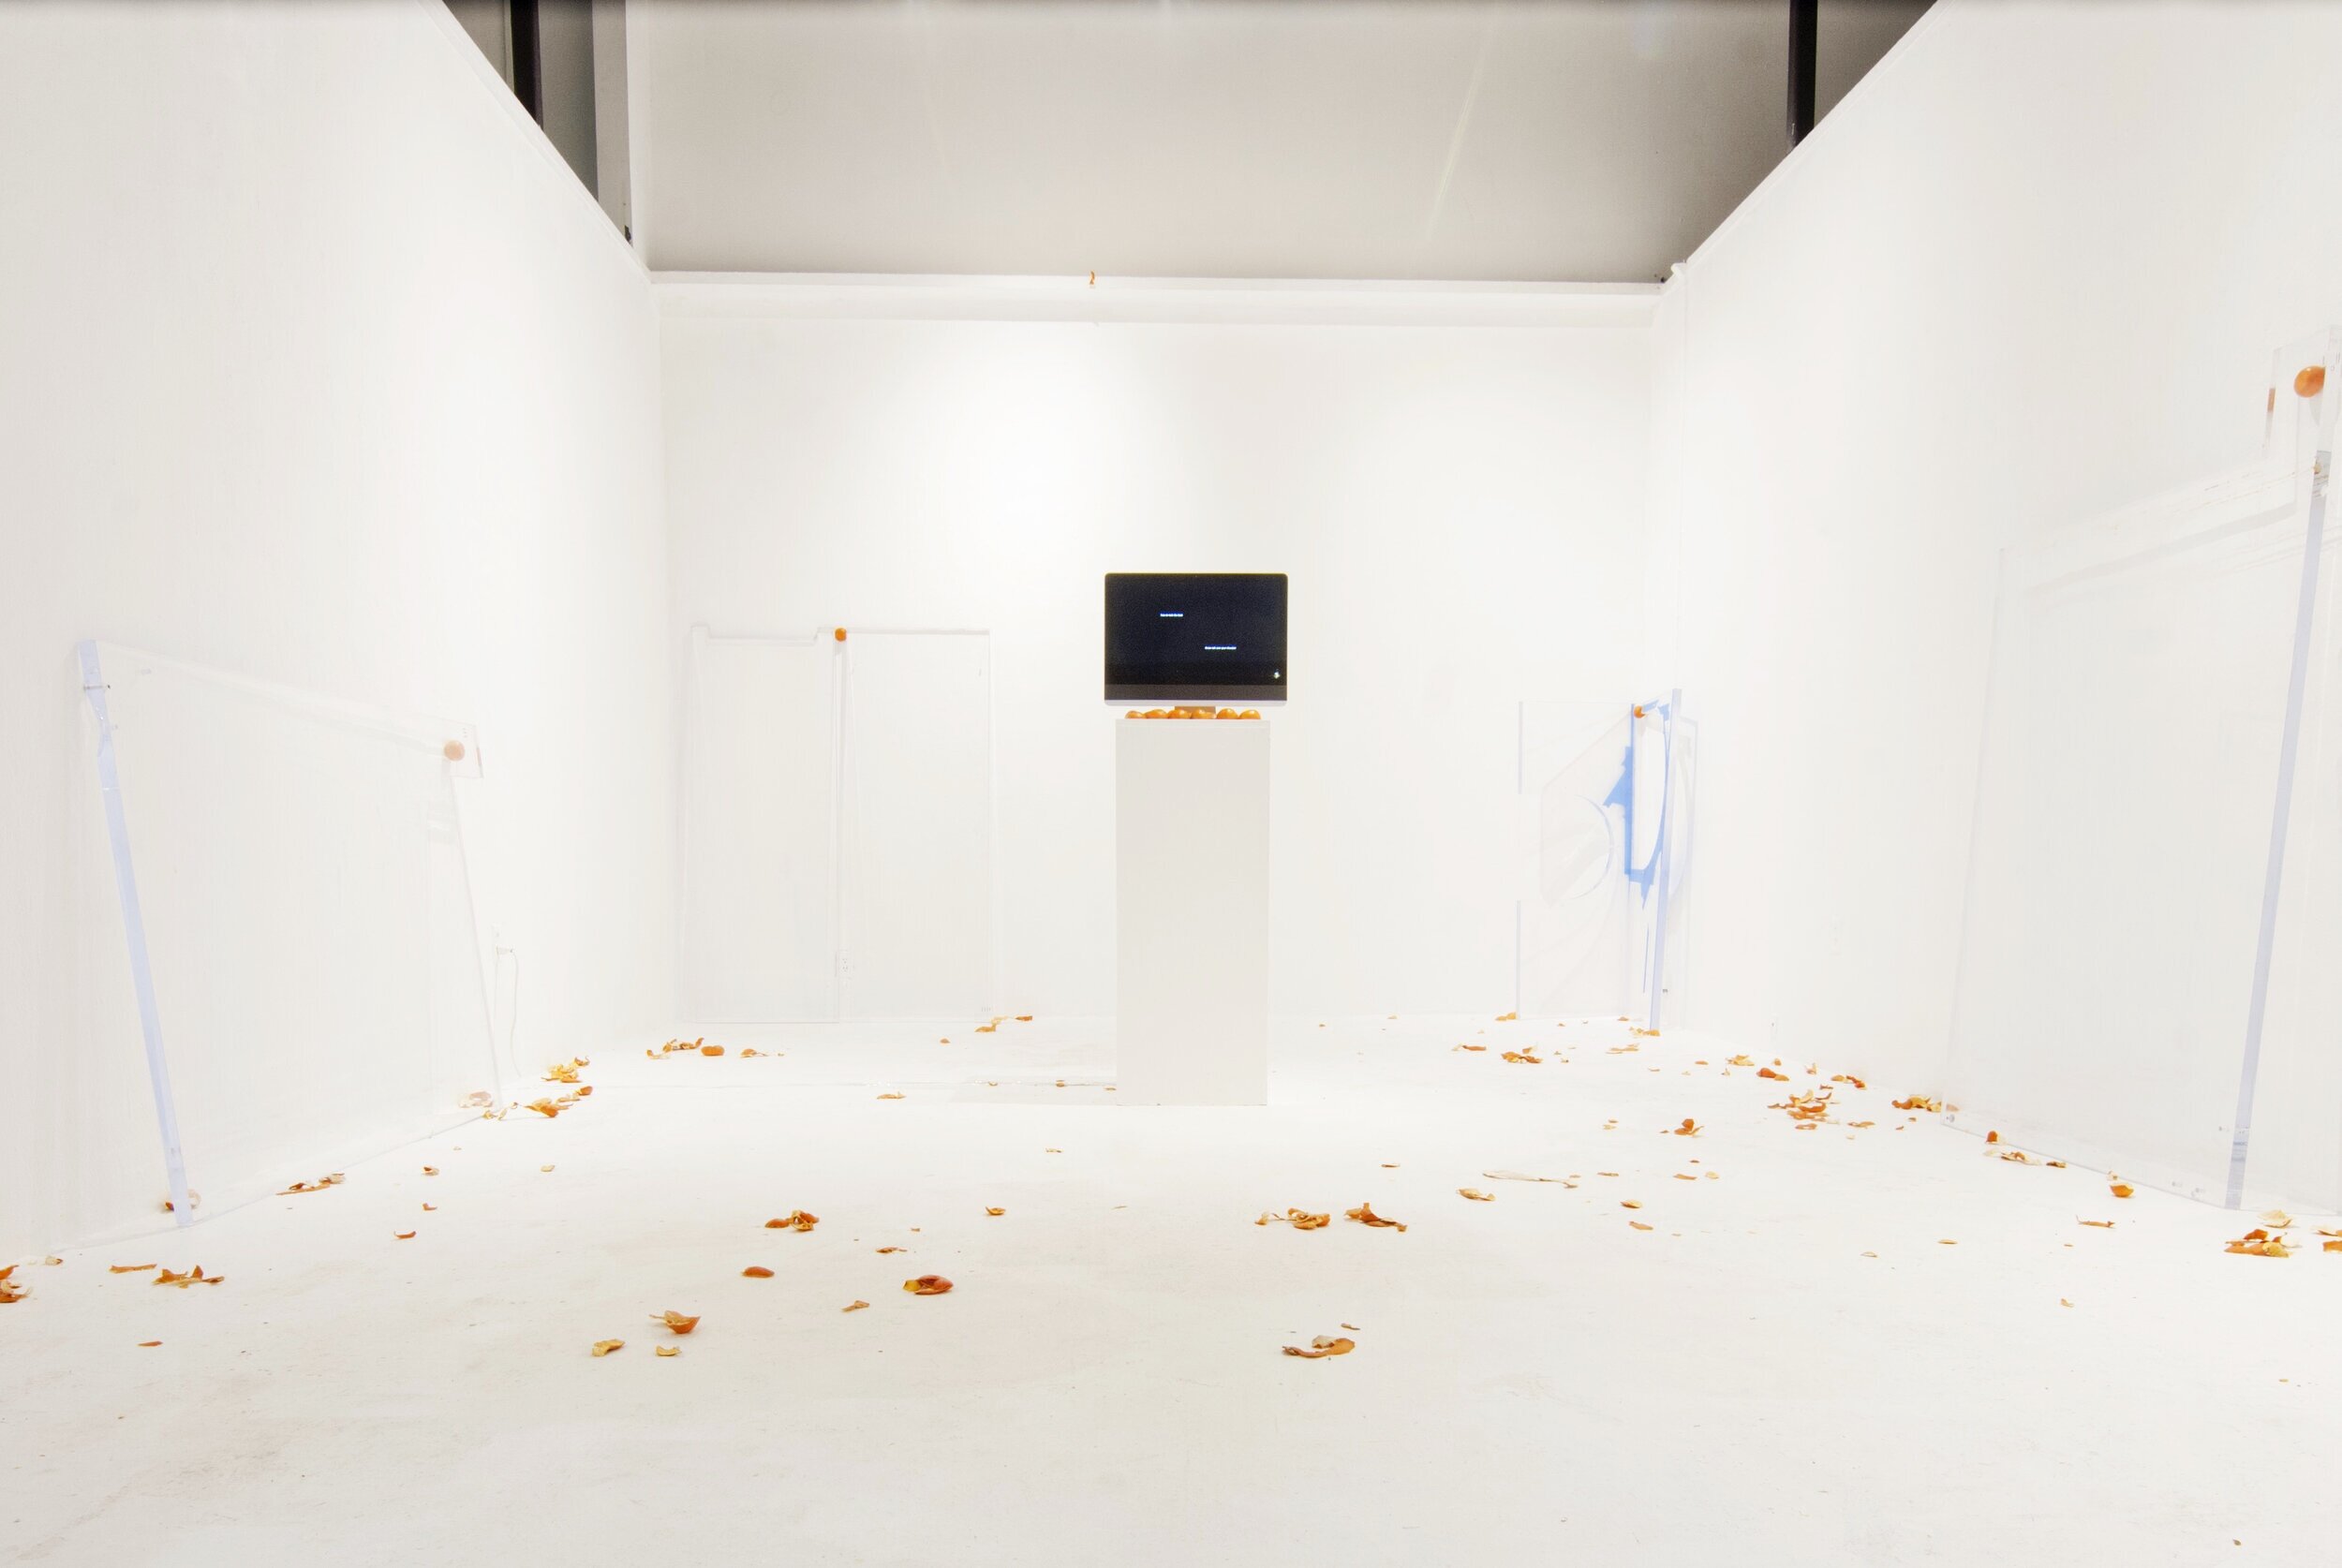 How to Peel an Orange (installation view, 2020)